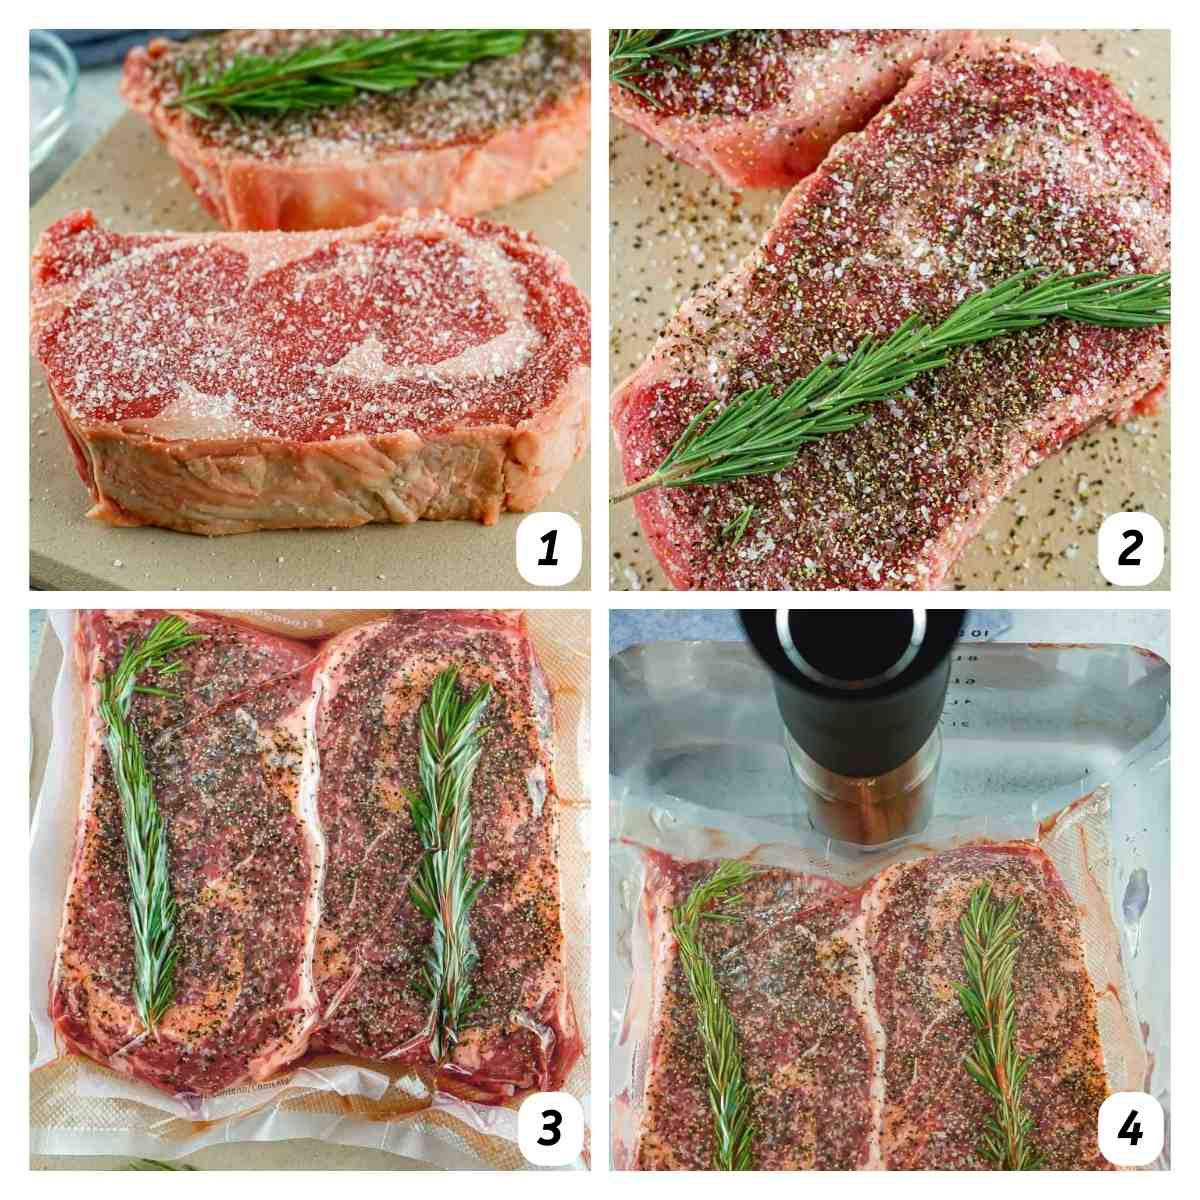 Four panel collage of process shots - dress steak with salt, pepper, and rosemary, vacuum sealing the bags, and cooking in a hot water bath.